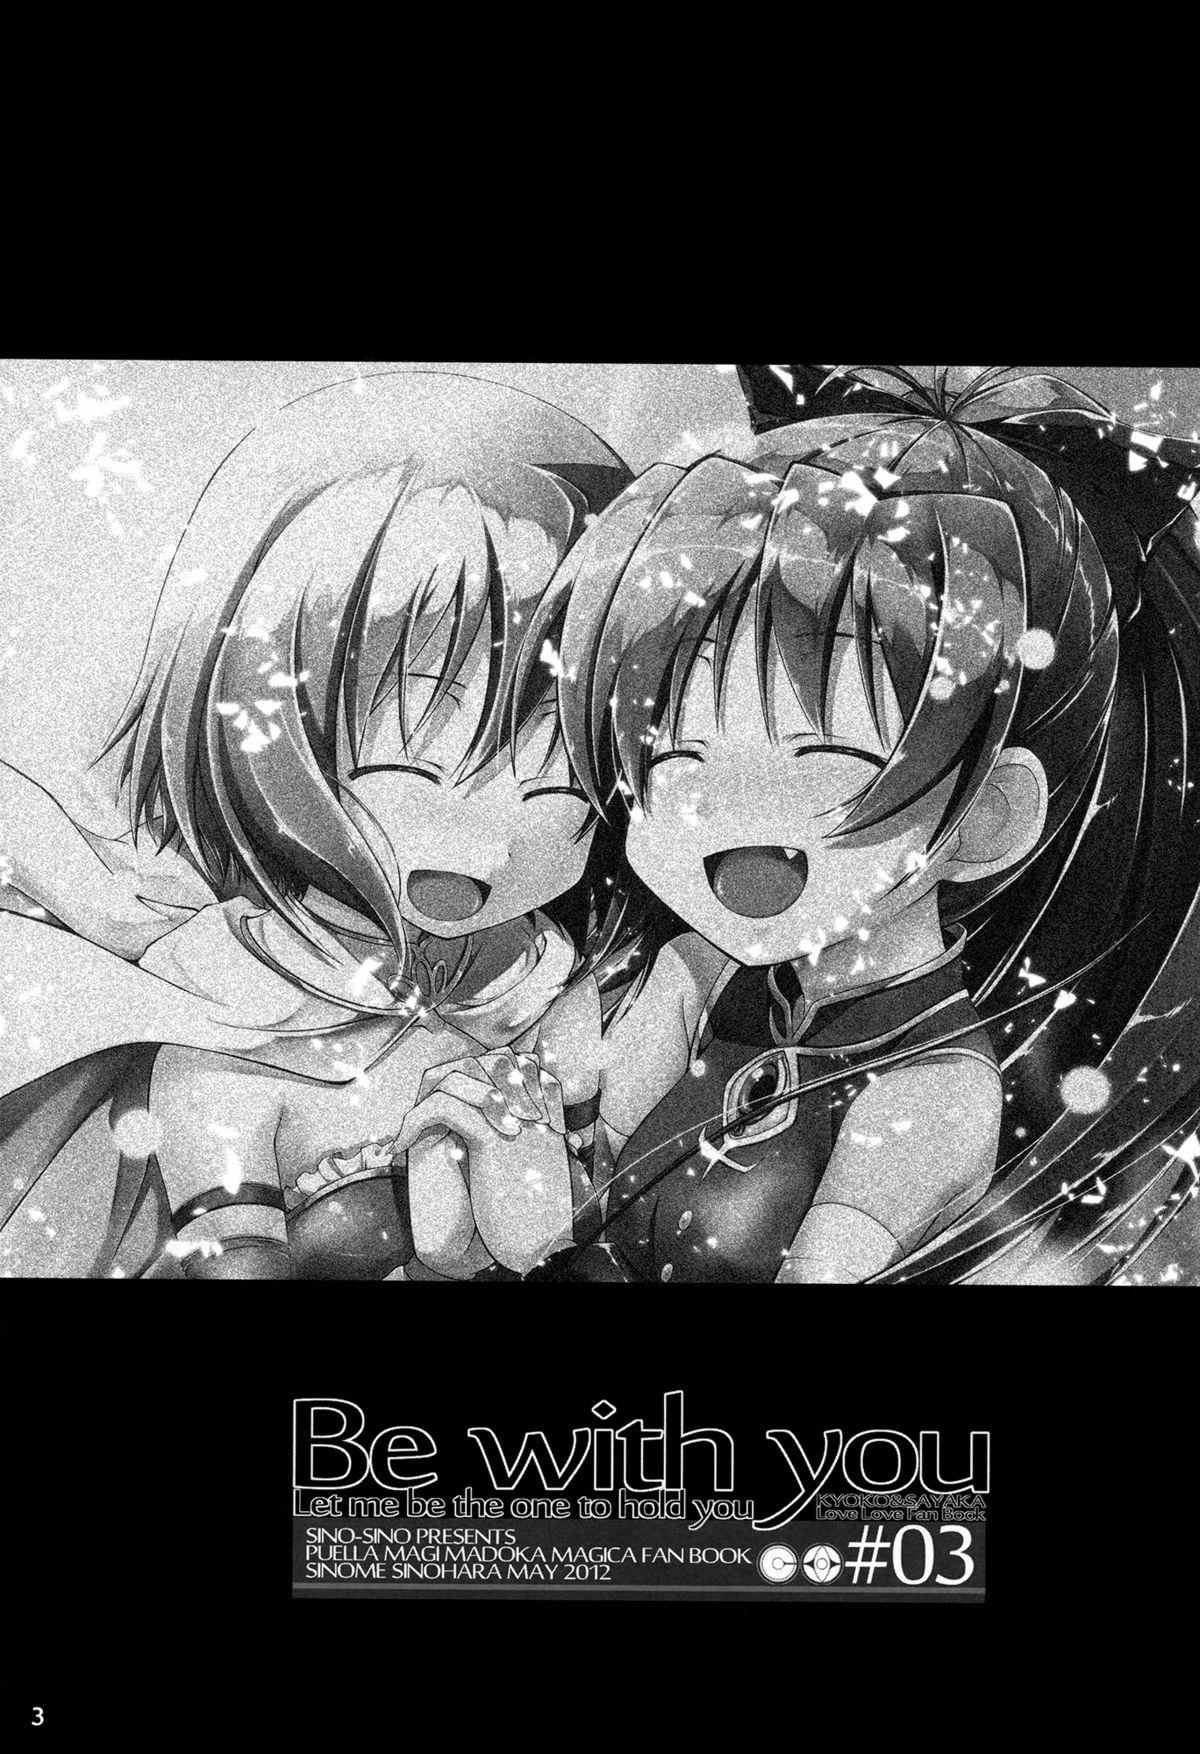 Be with you 1